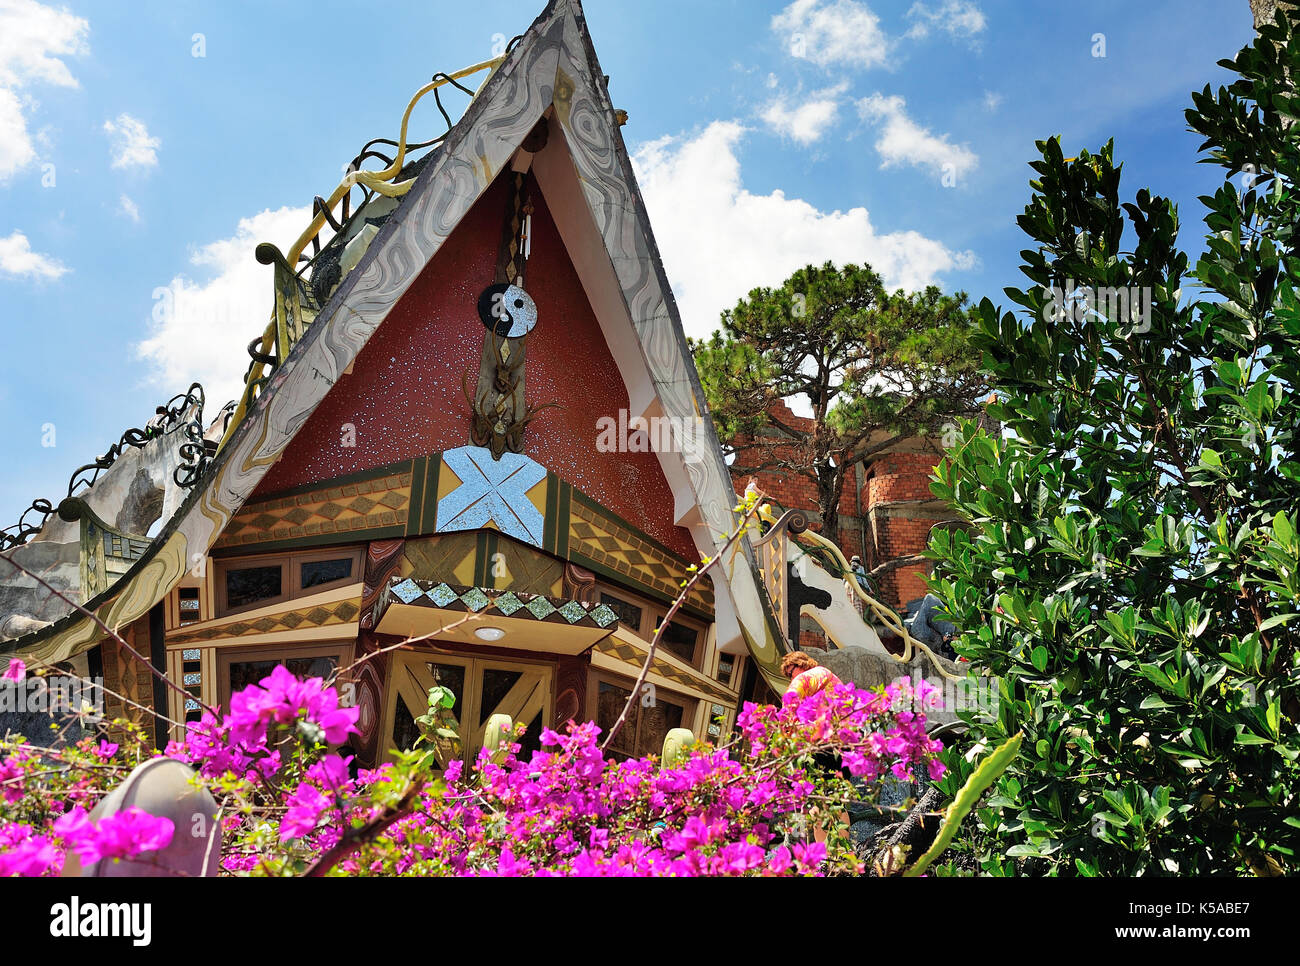 Da Lat,Vietnam - Feb 22,2015: Hang Nga guesthouse, popularly known as the Crazy House in Dalat, Vietnam. It is designed by Vietnamese woman architect  Stock Photo